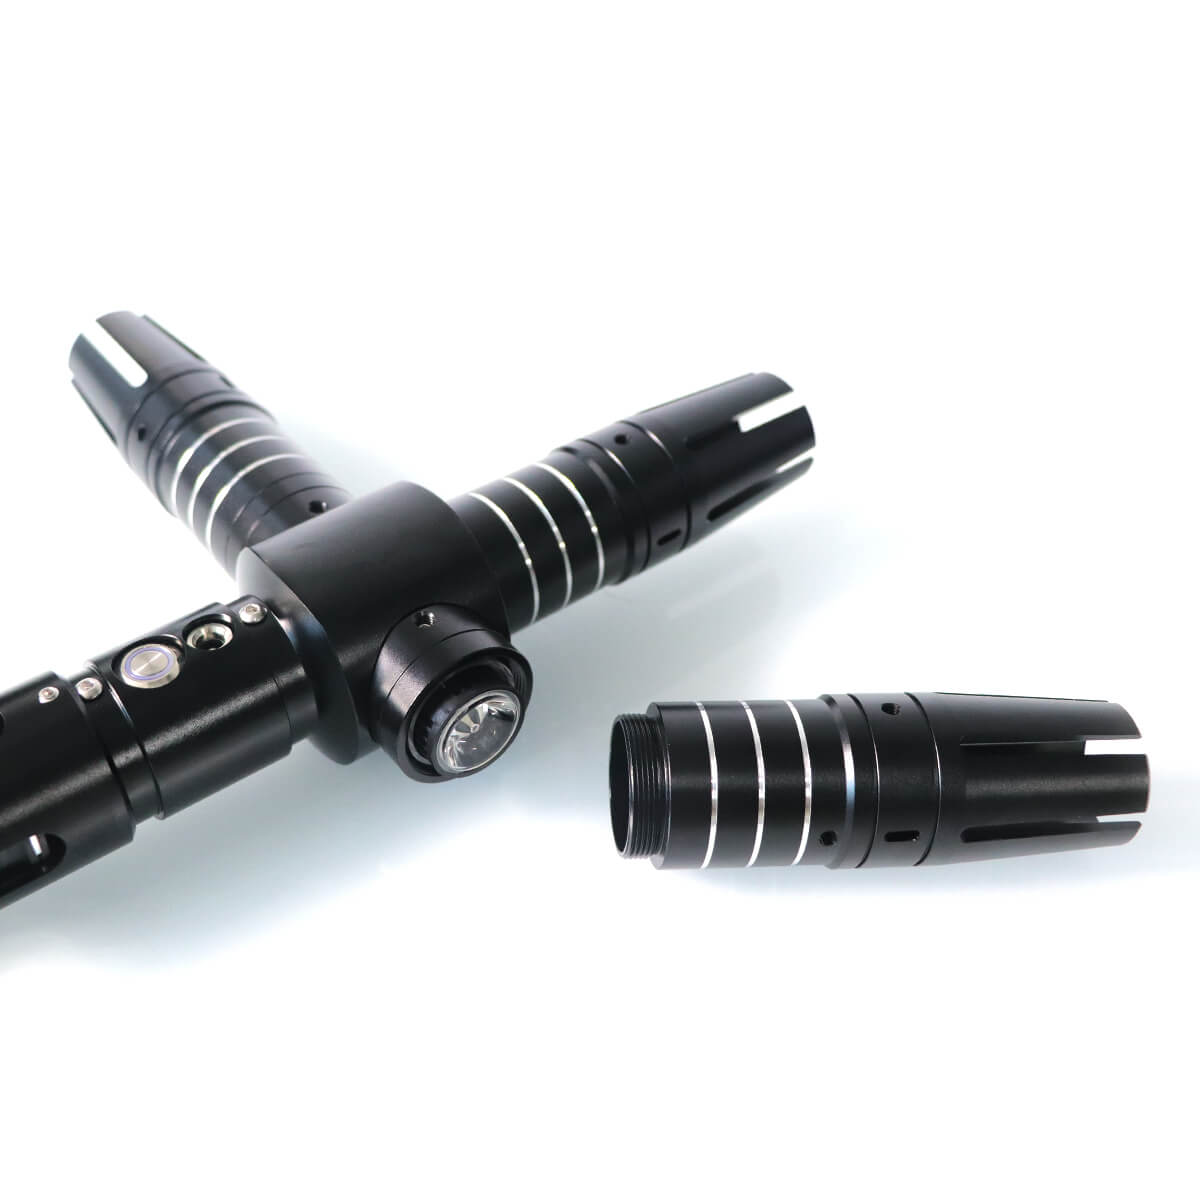 Overlord Lightsaber isabers